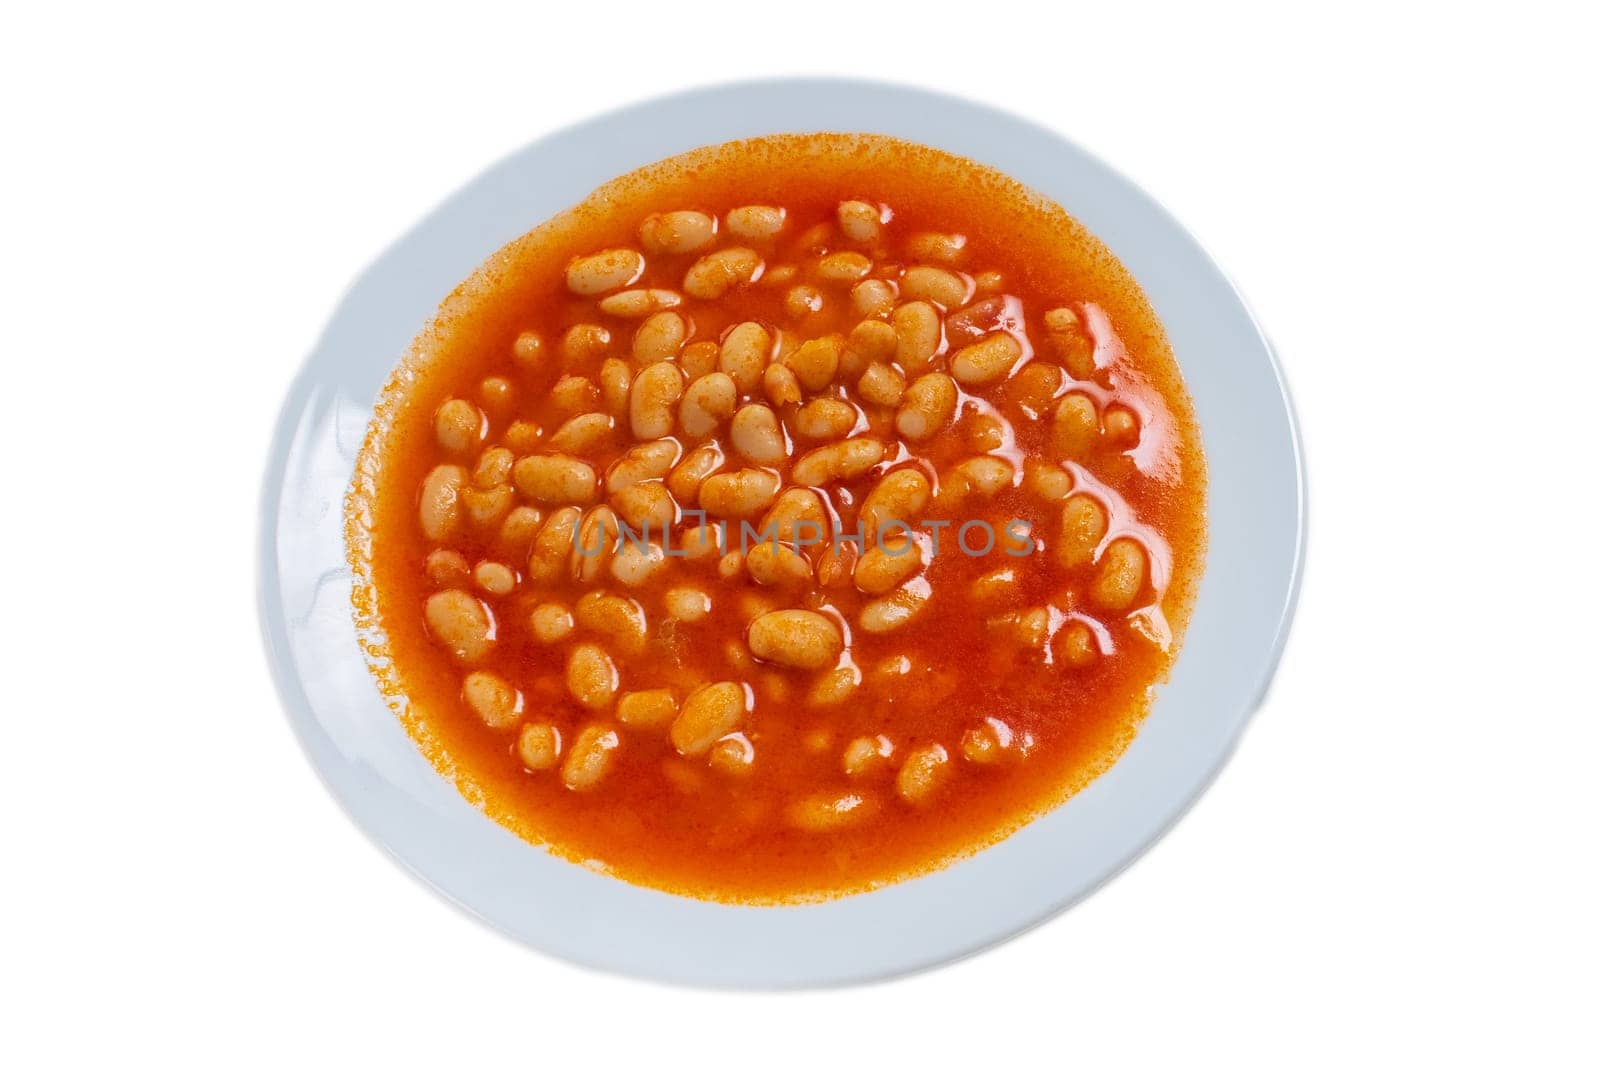 Photos of Turkey Famous and Delicious Homemade Dishes for Hotel Restaurant Orders and Menu and Internet and TV Advertising haricot bean by senkaya